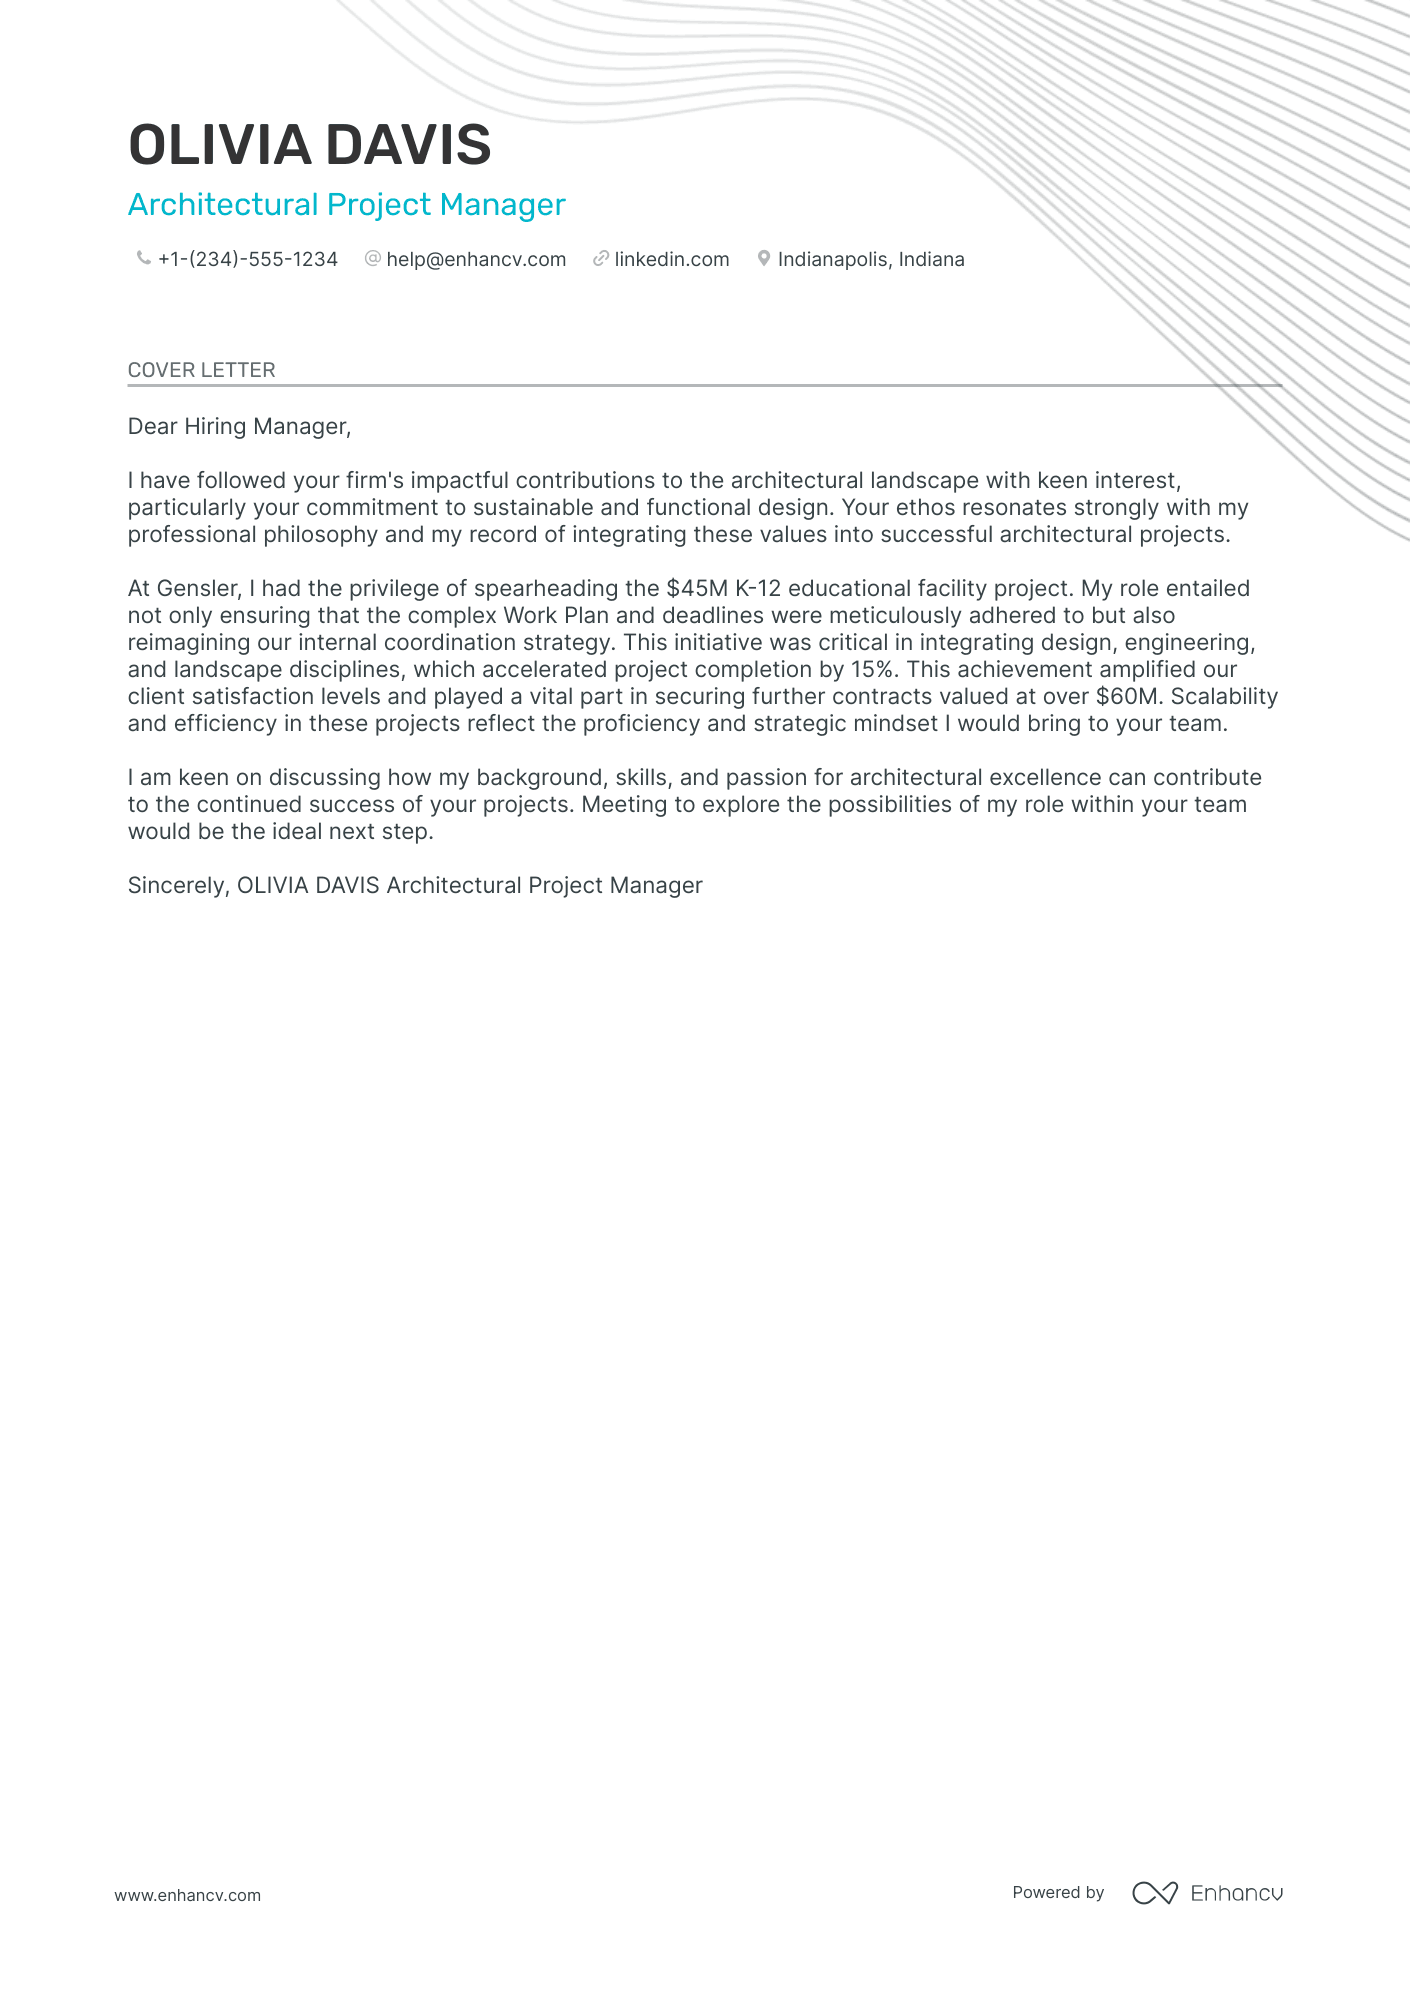 Architectural Project Manager cover letter